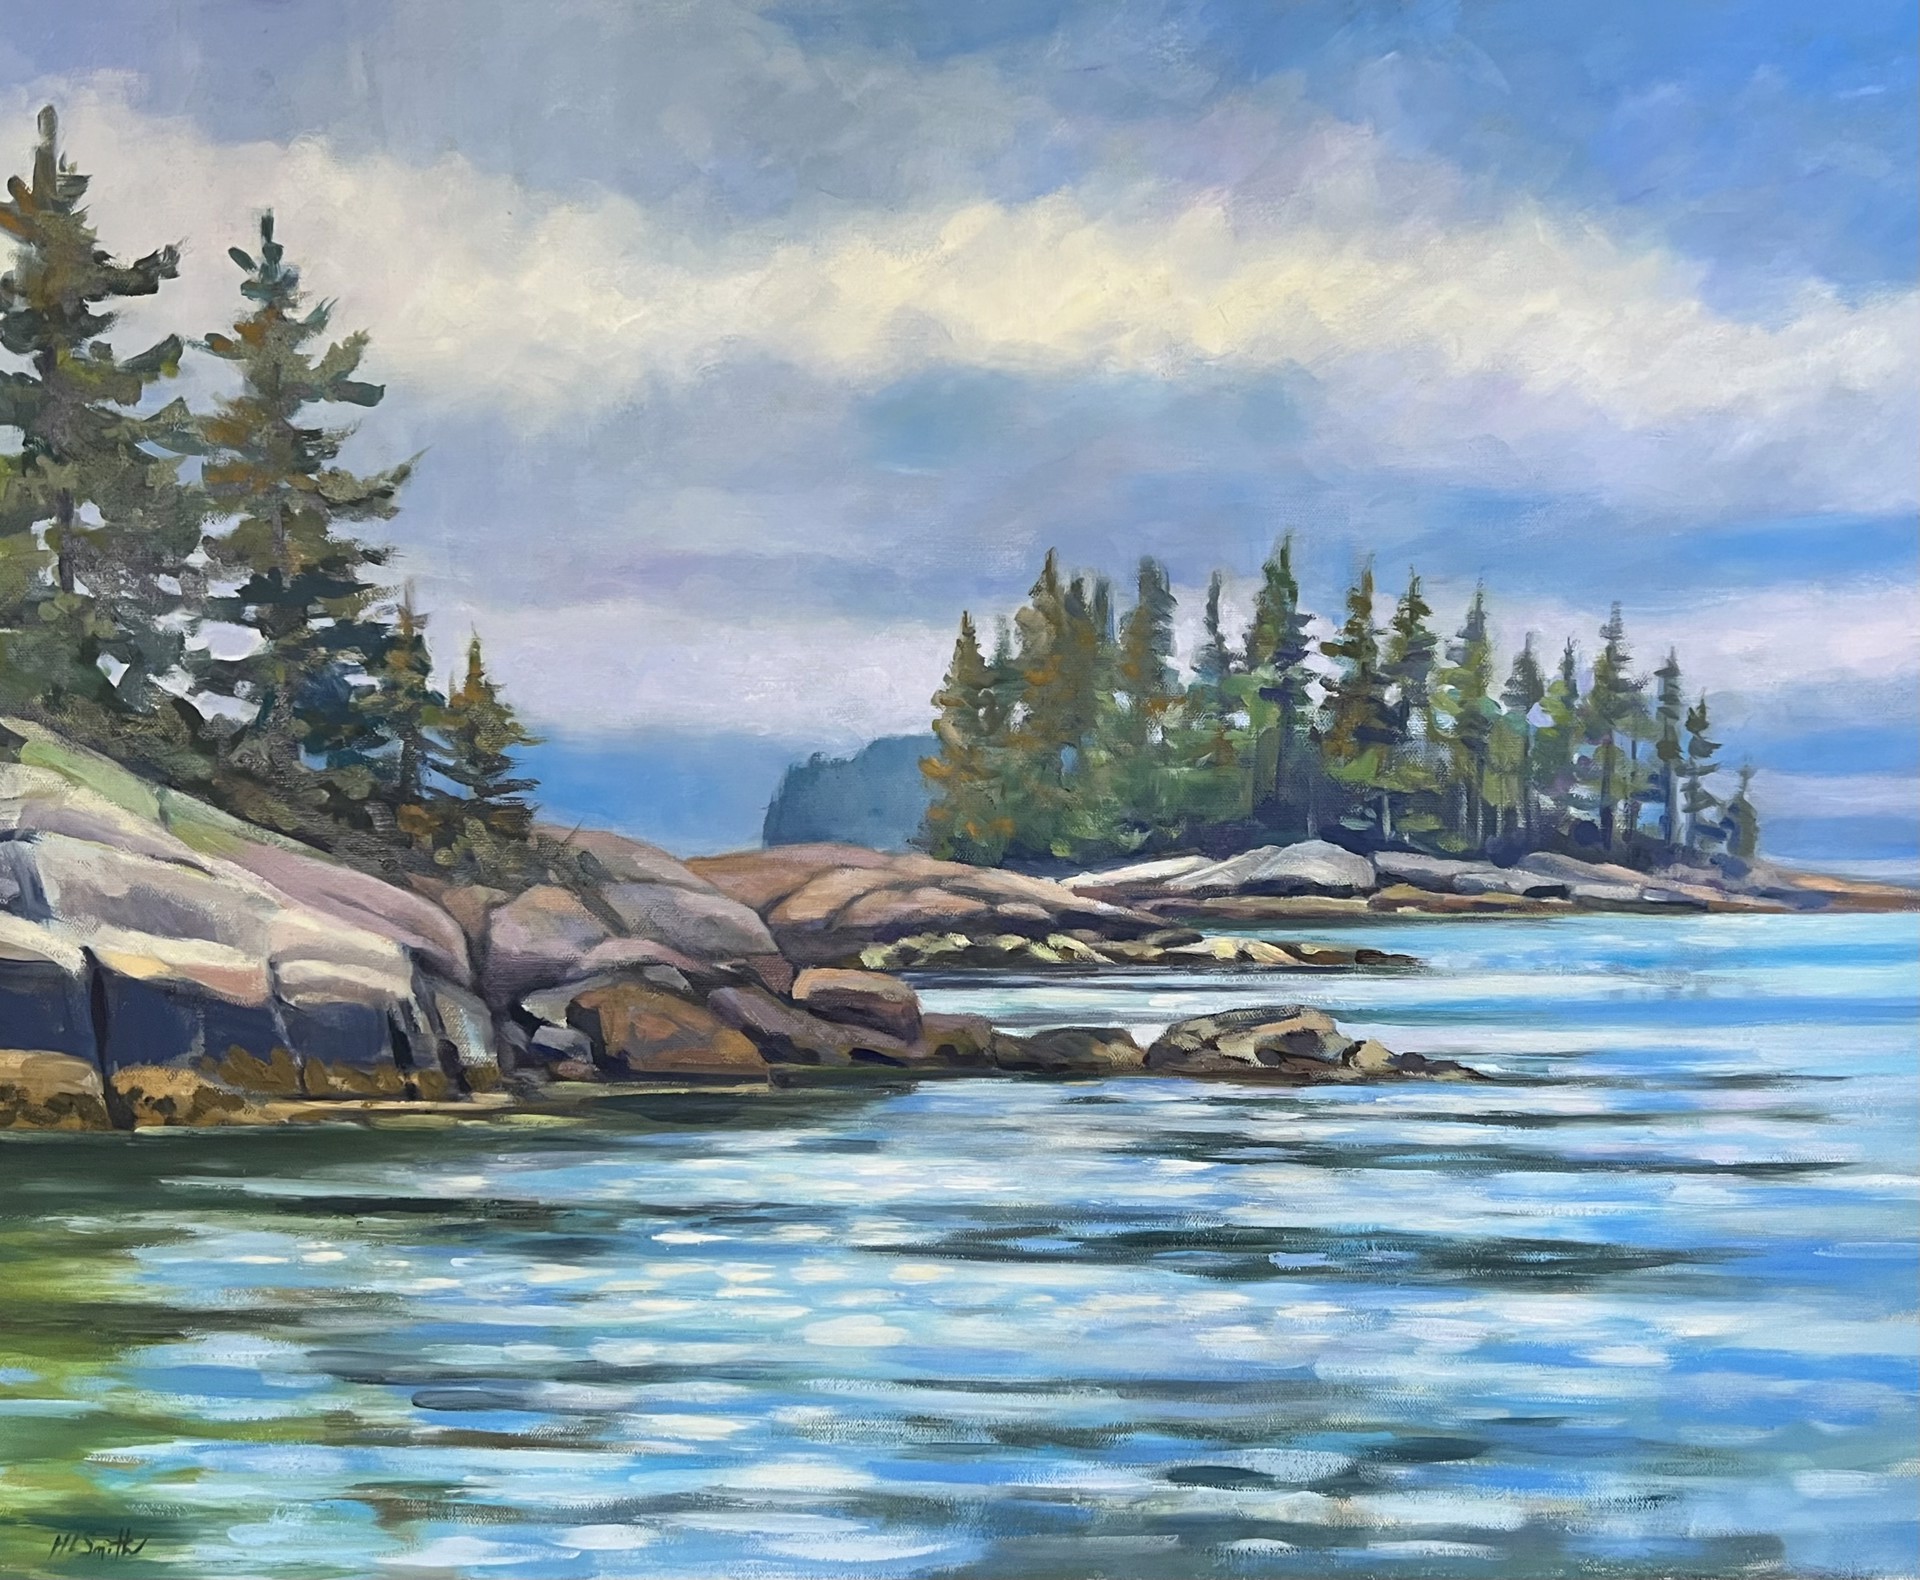 Sea, Granite and Fir Trees by Holly L. Smith